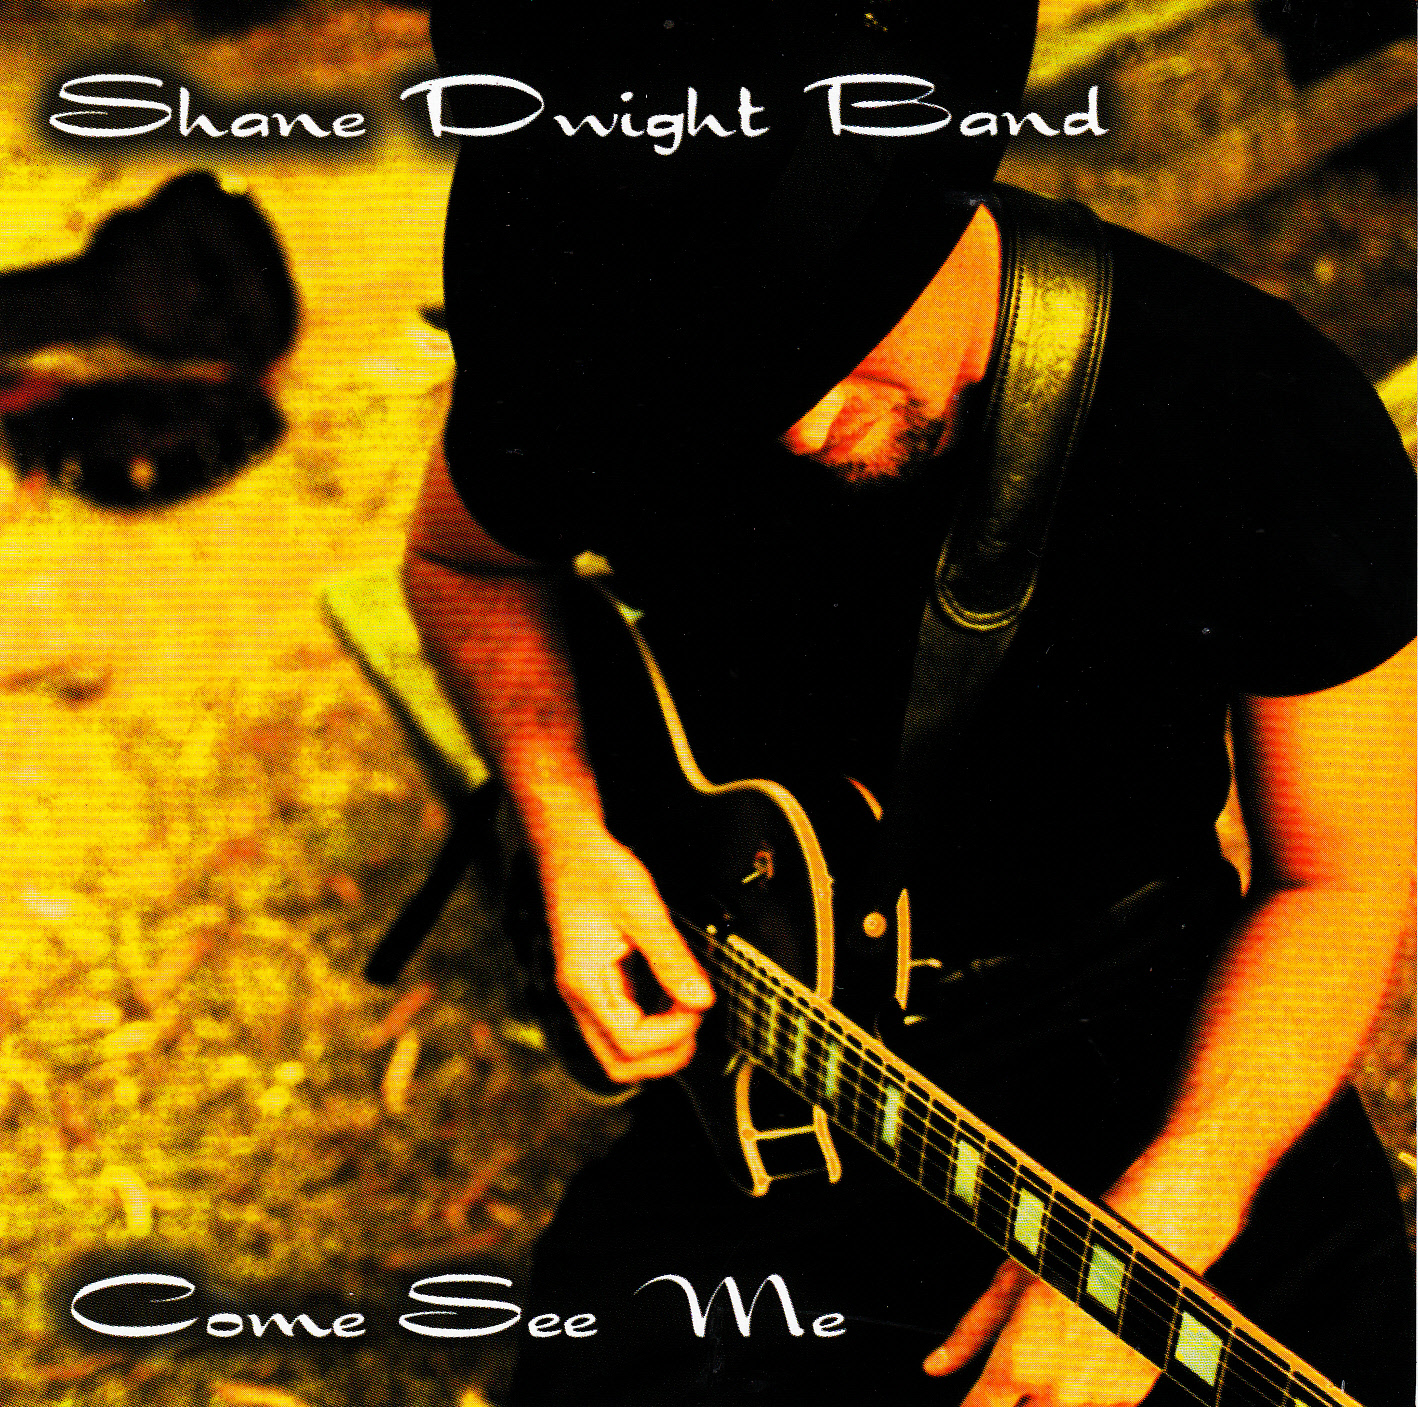 Shane Dwight Band - Come See Me